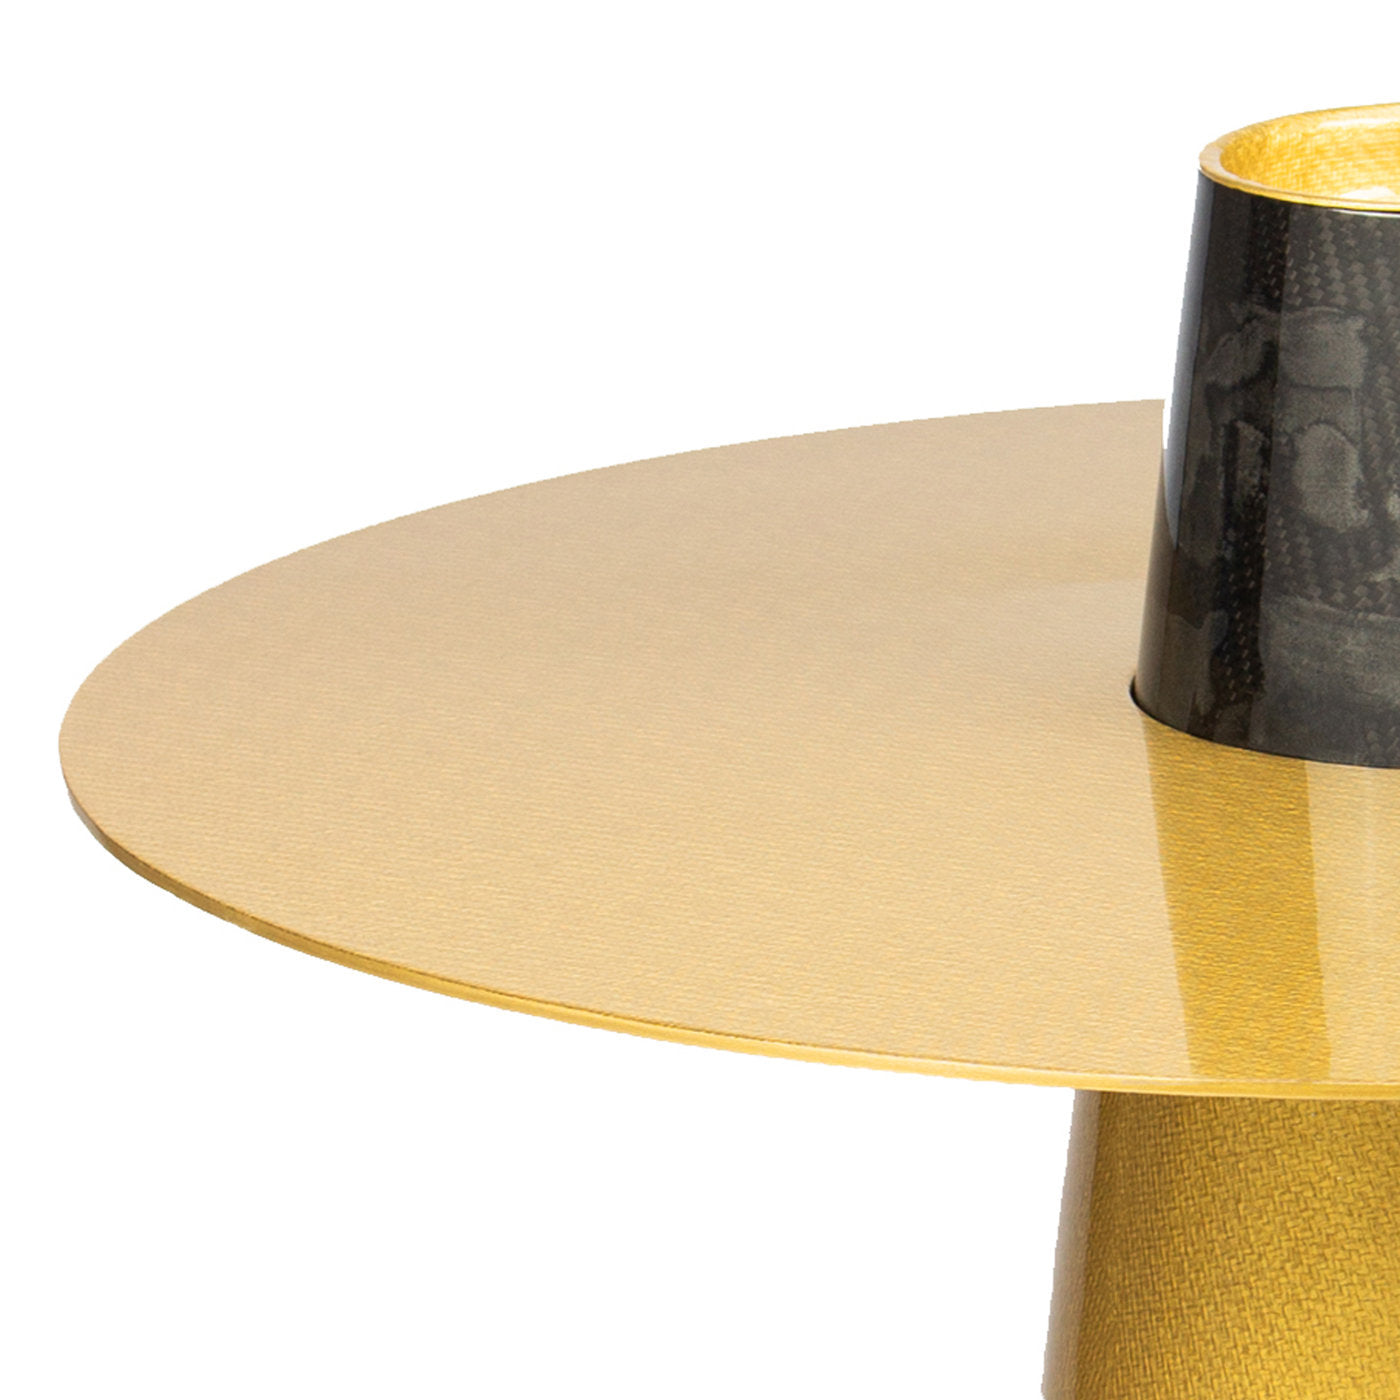 Invariants Gold Side Table - Alternative view 1